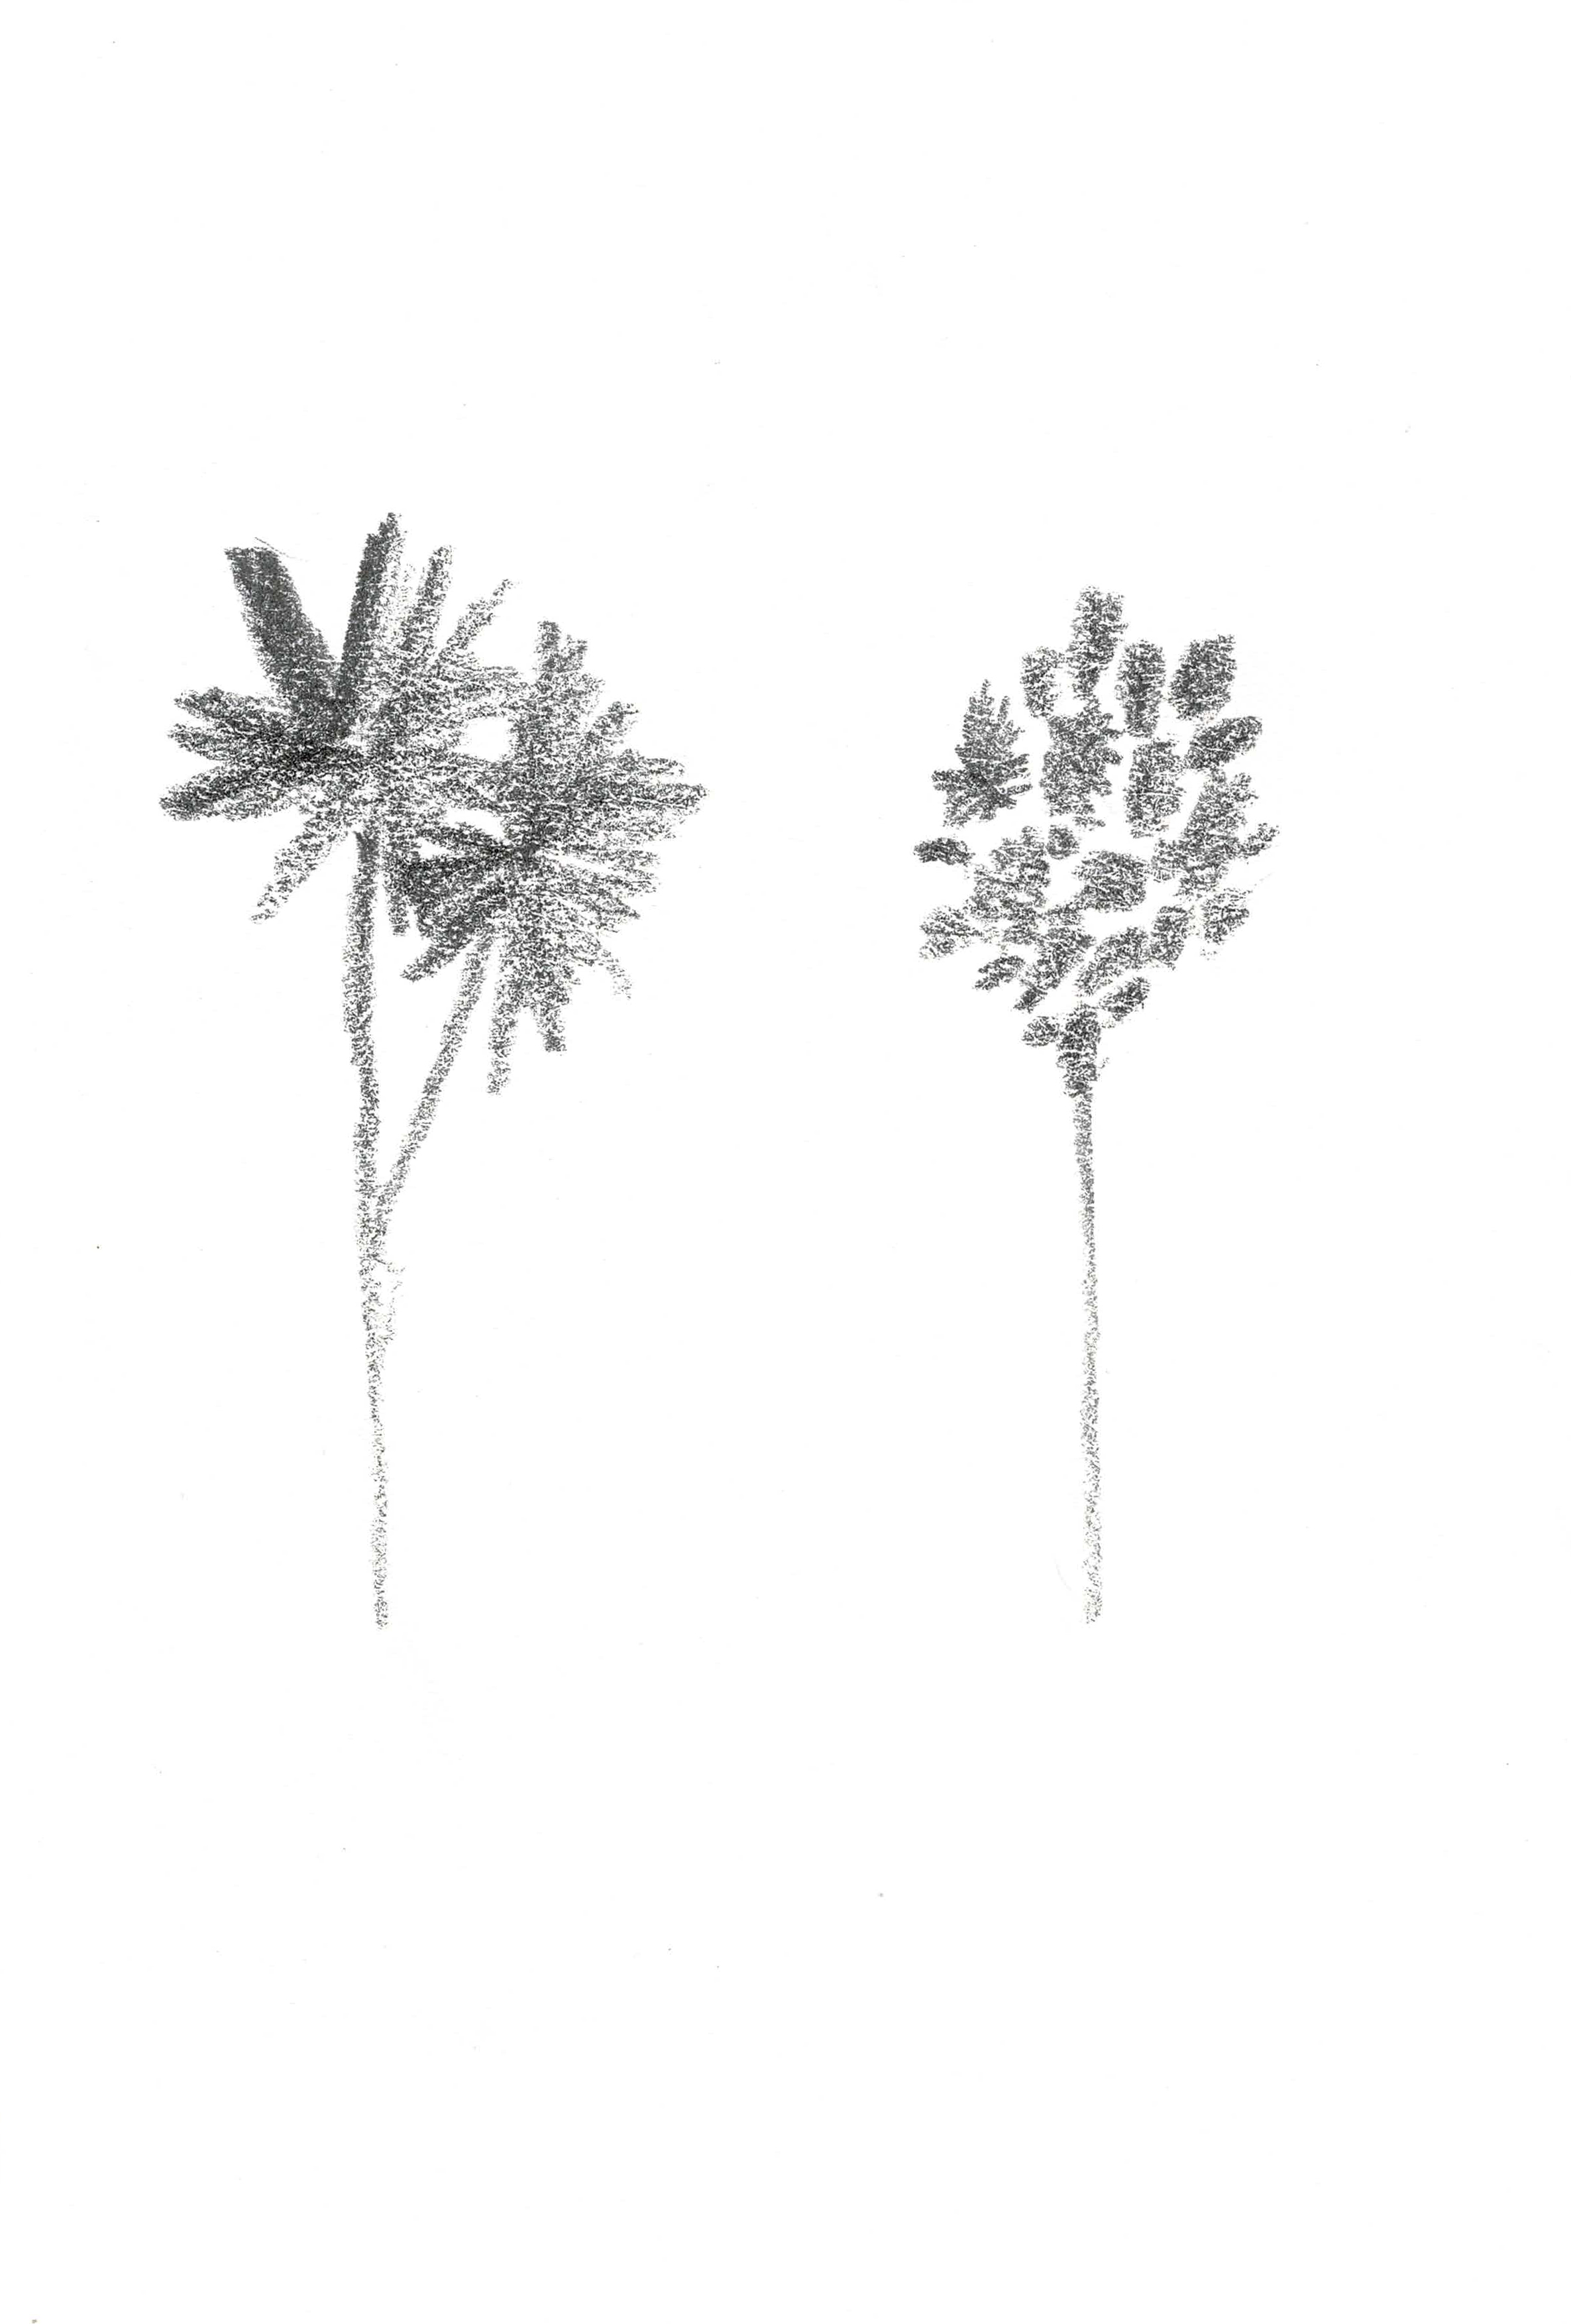 two flower bouquets drawn in pencil side by side